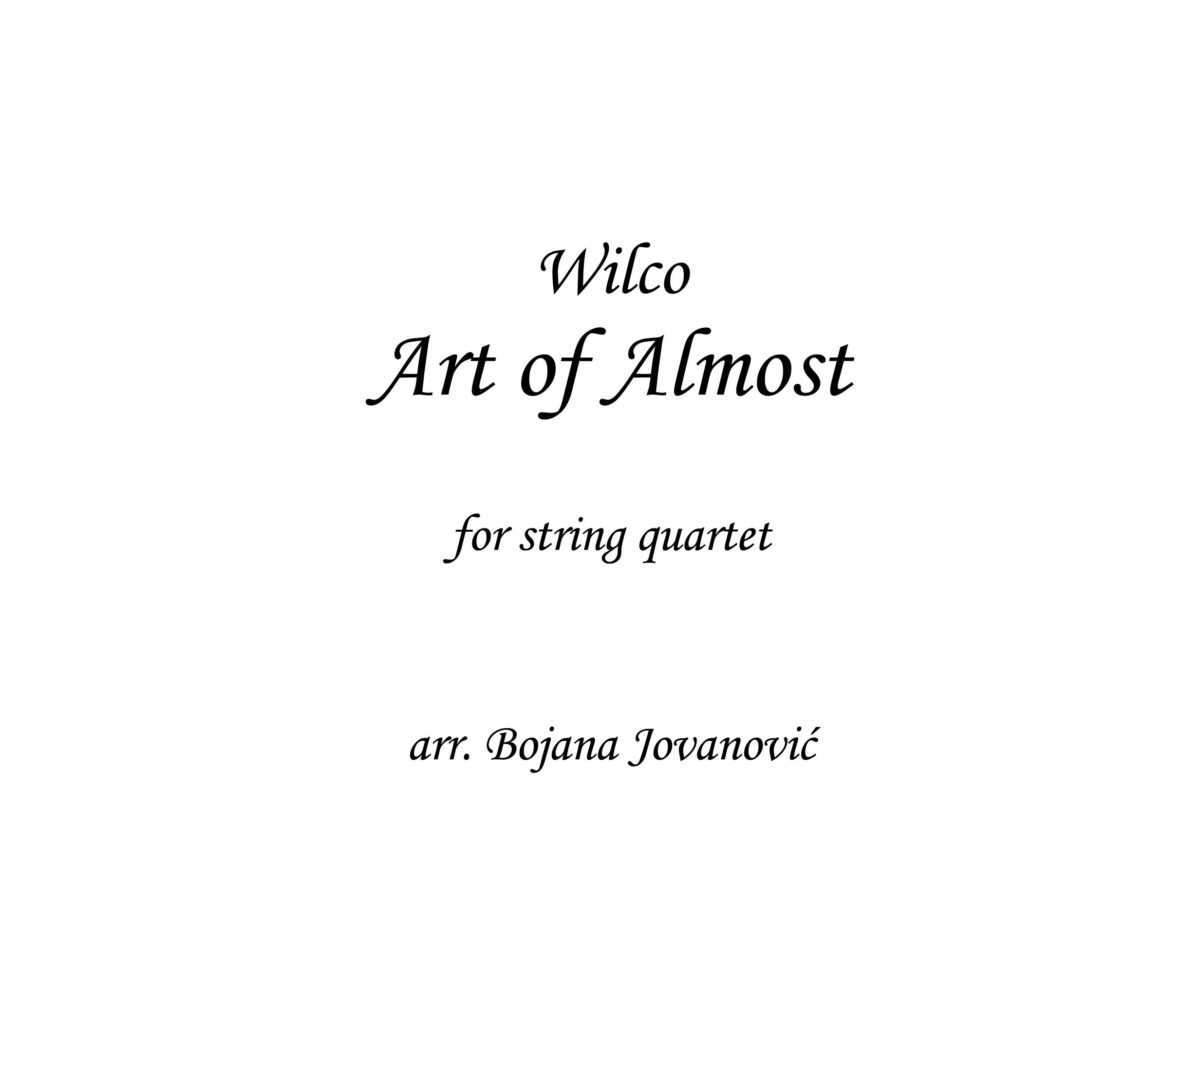 Art of almost (Wilco) - Sheet Music